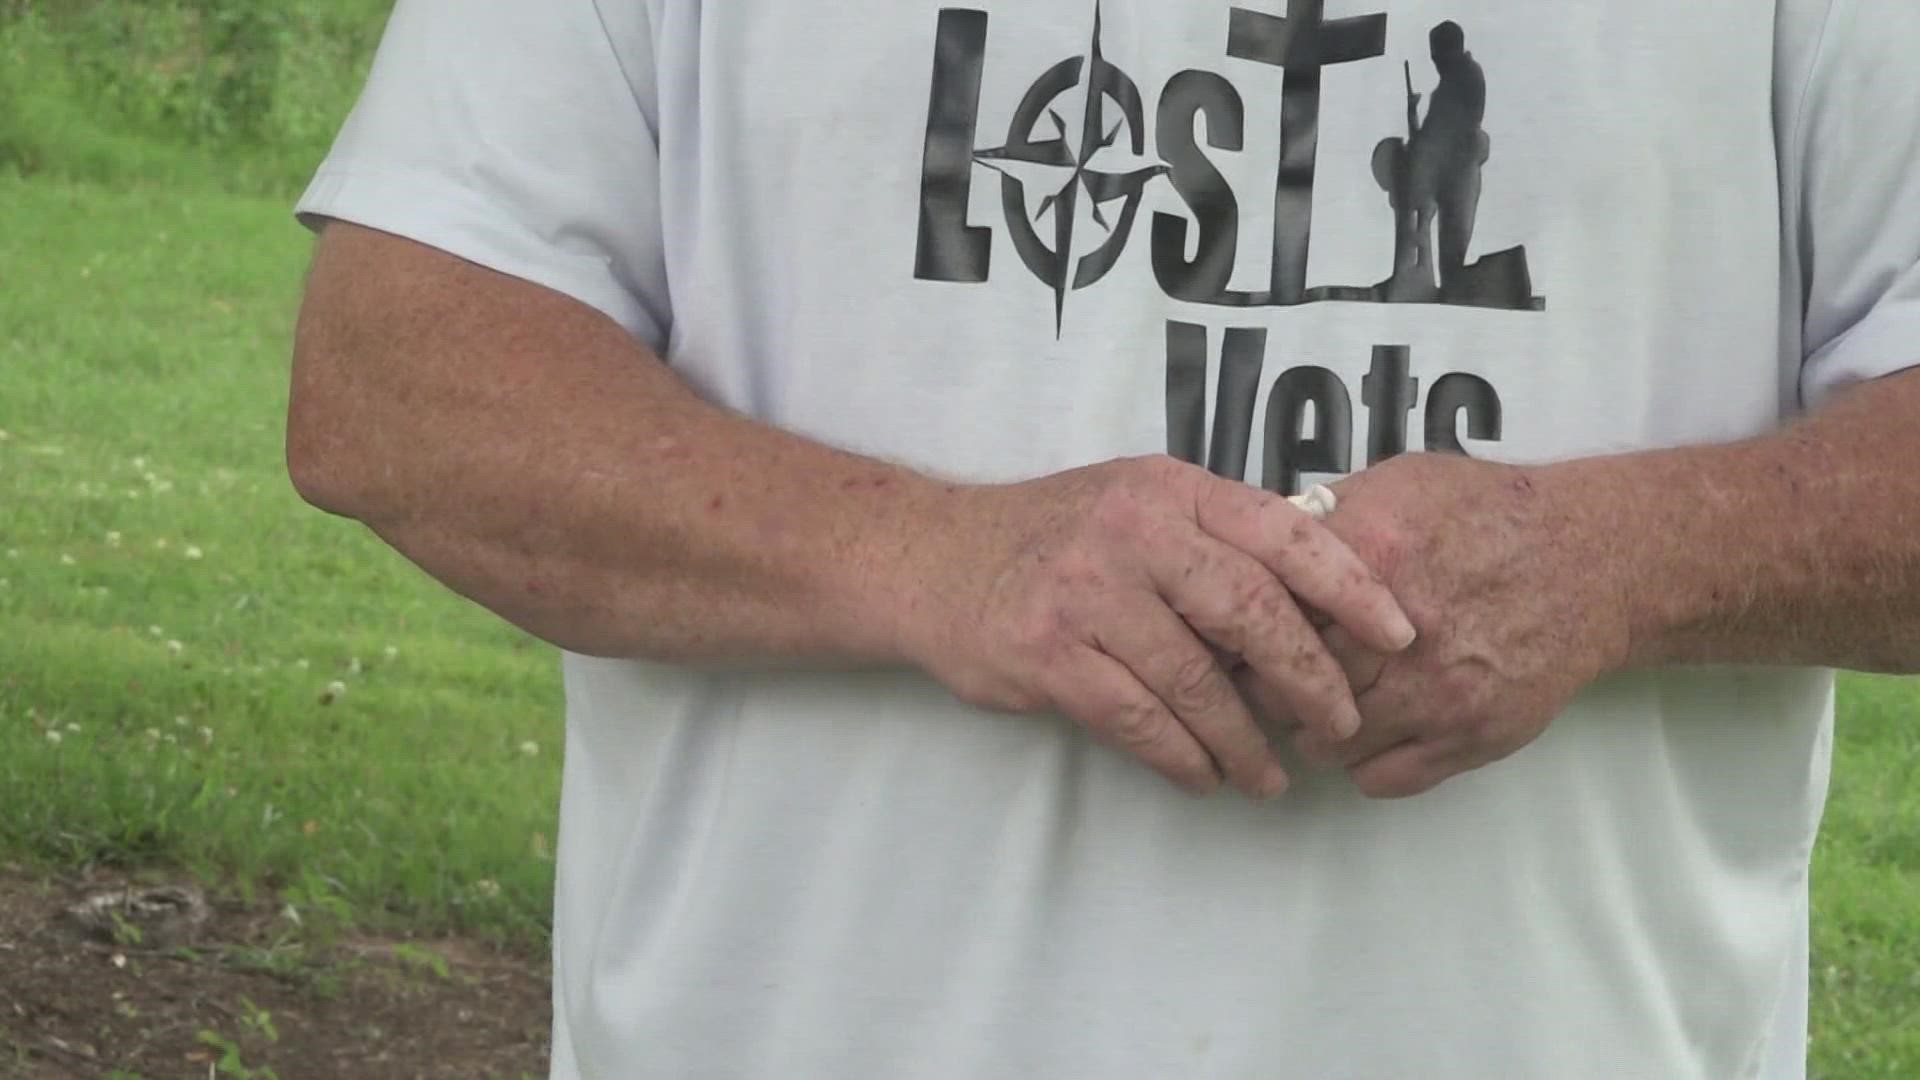 The Lost Vets Rescue said they have helped more than 200 veterans across Tennessee.